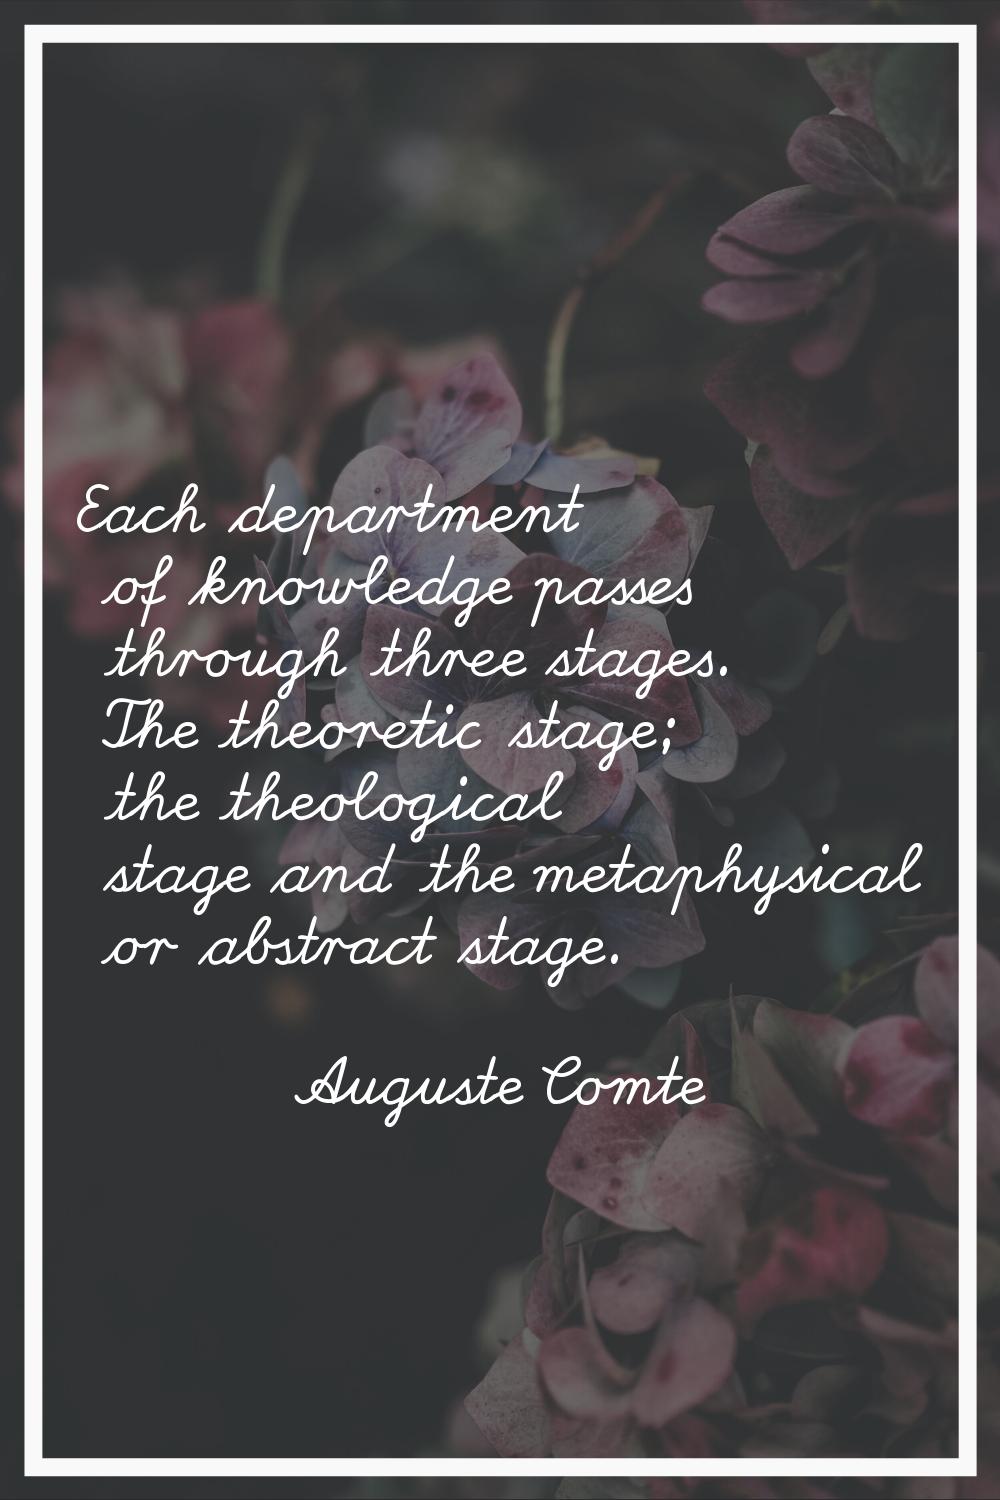 Each department of knowledge passes through three stages. The theoretic stage; the theological stag